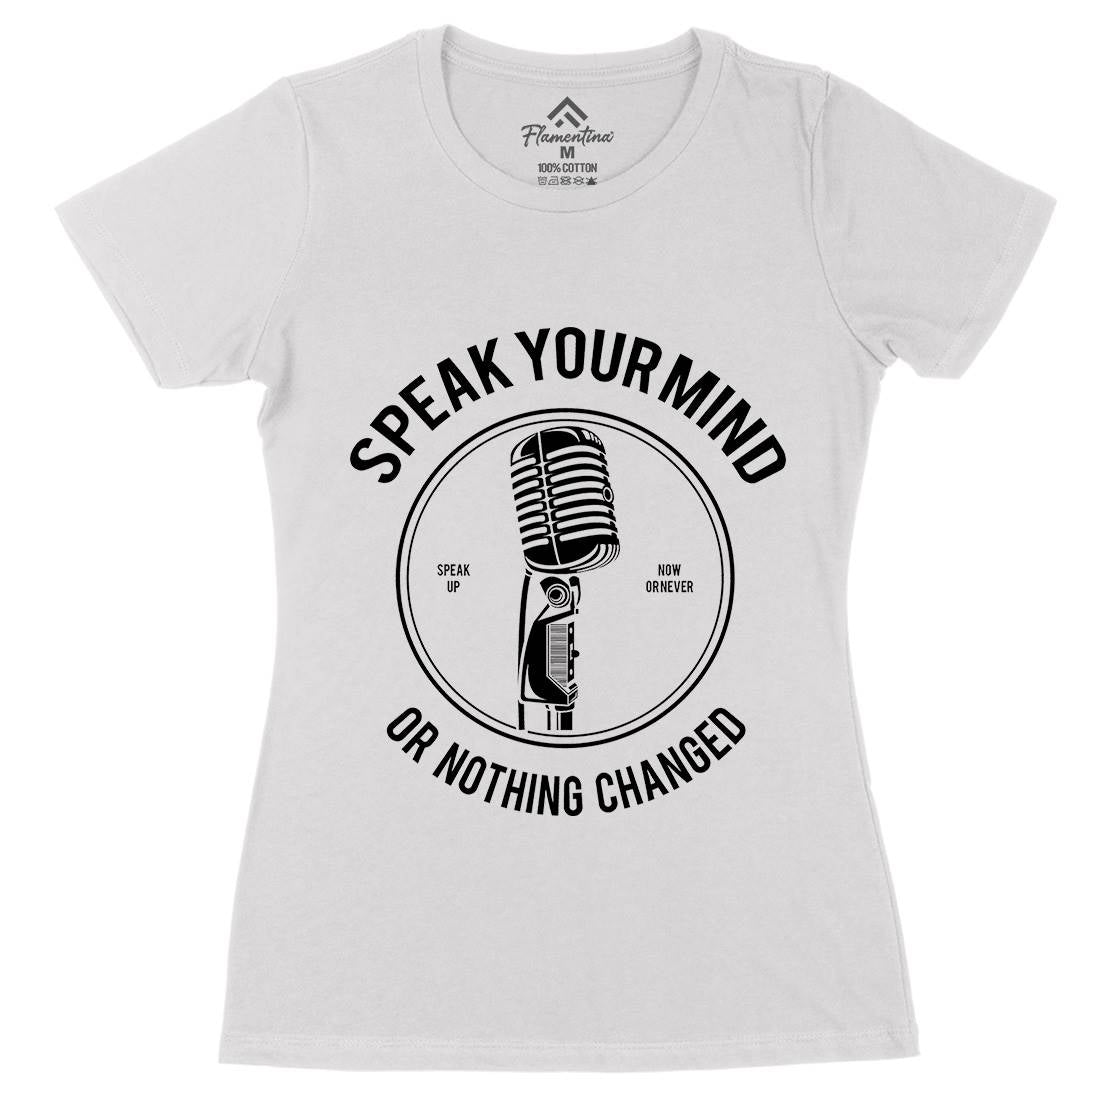 Speak Your Mind Womens Organic Crew Neck T-Shirt Quotes A152